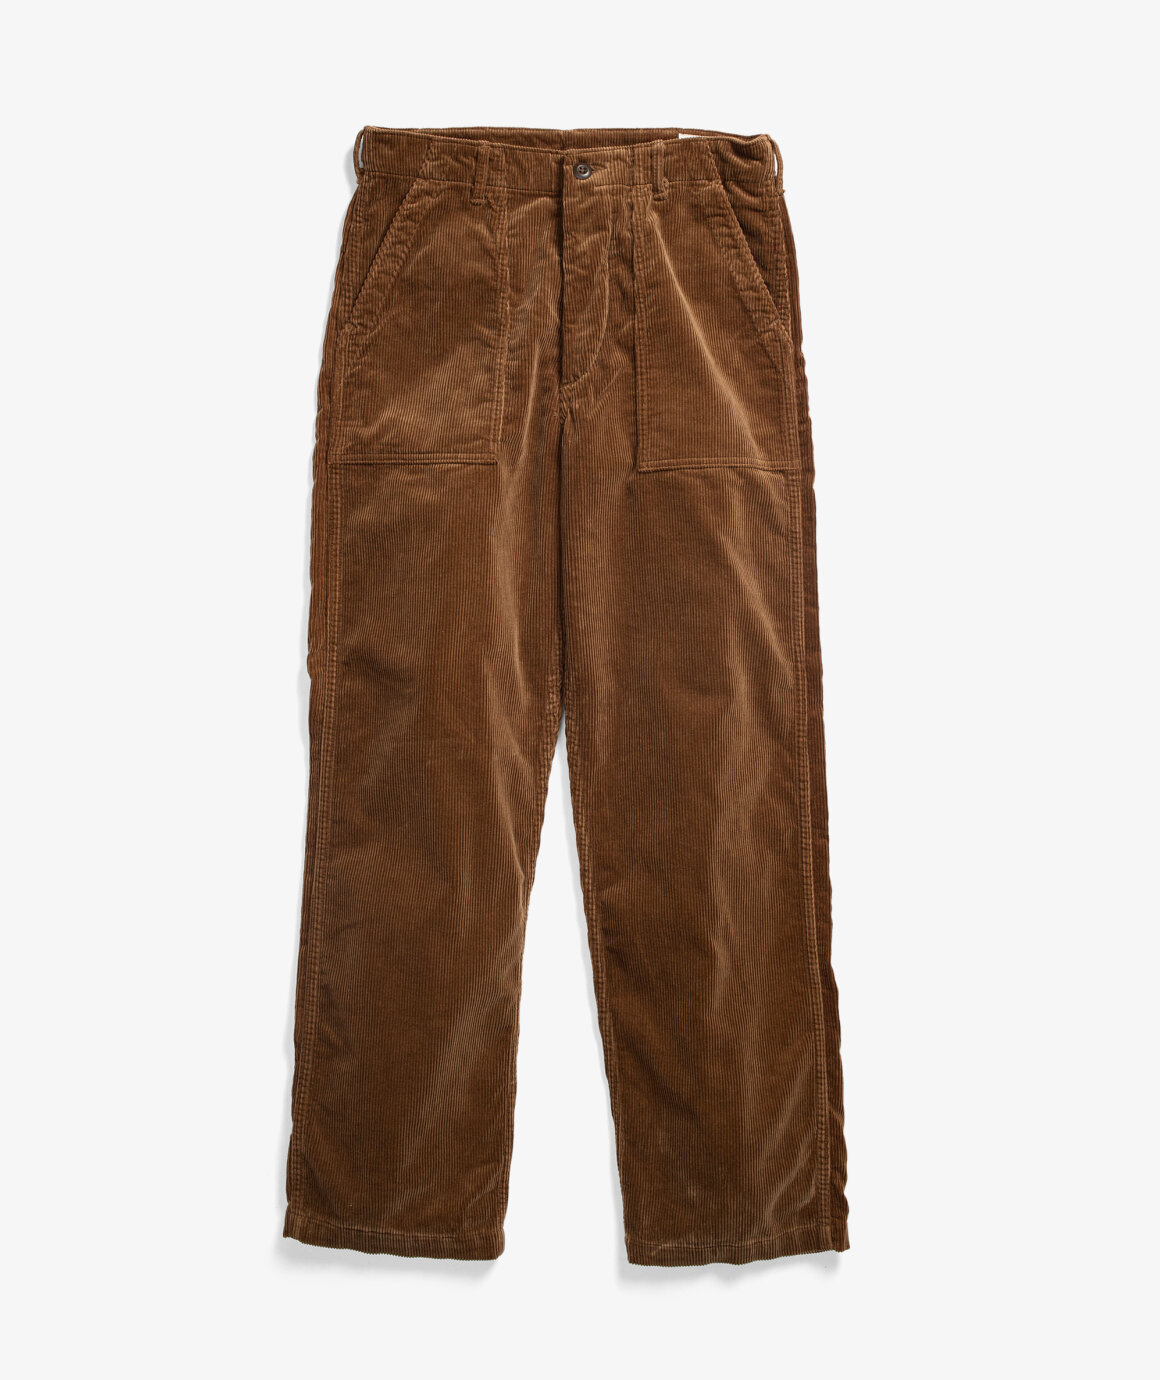 Norse Store | Shipping Worldwide - orSlow US ARMY FATIGUE CORDUROY ...